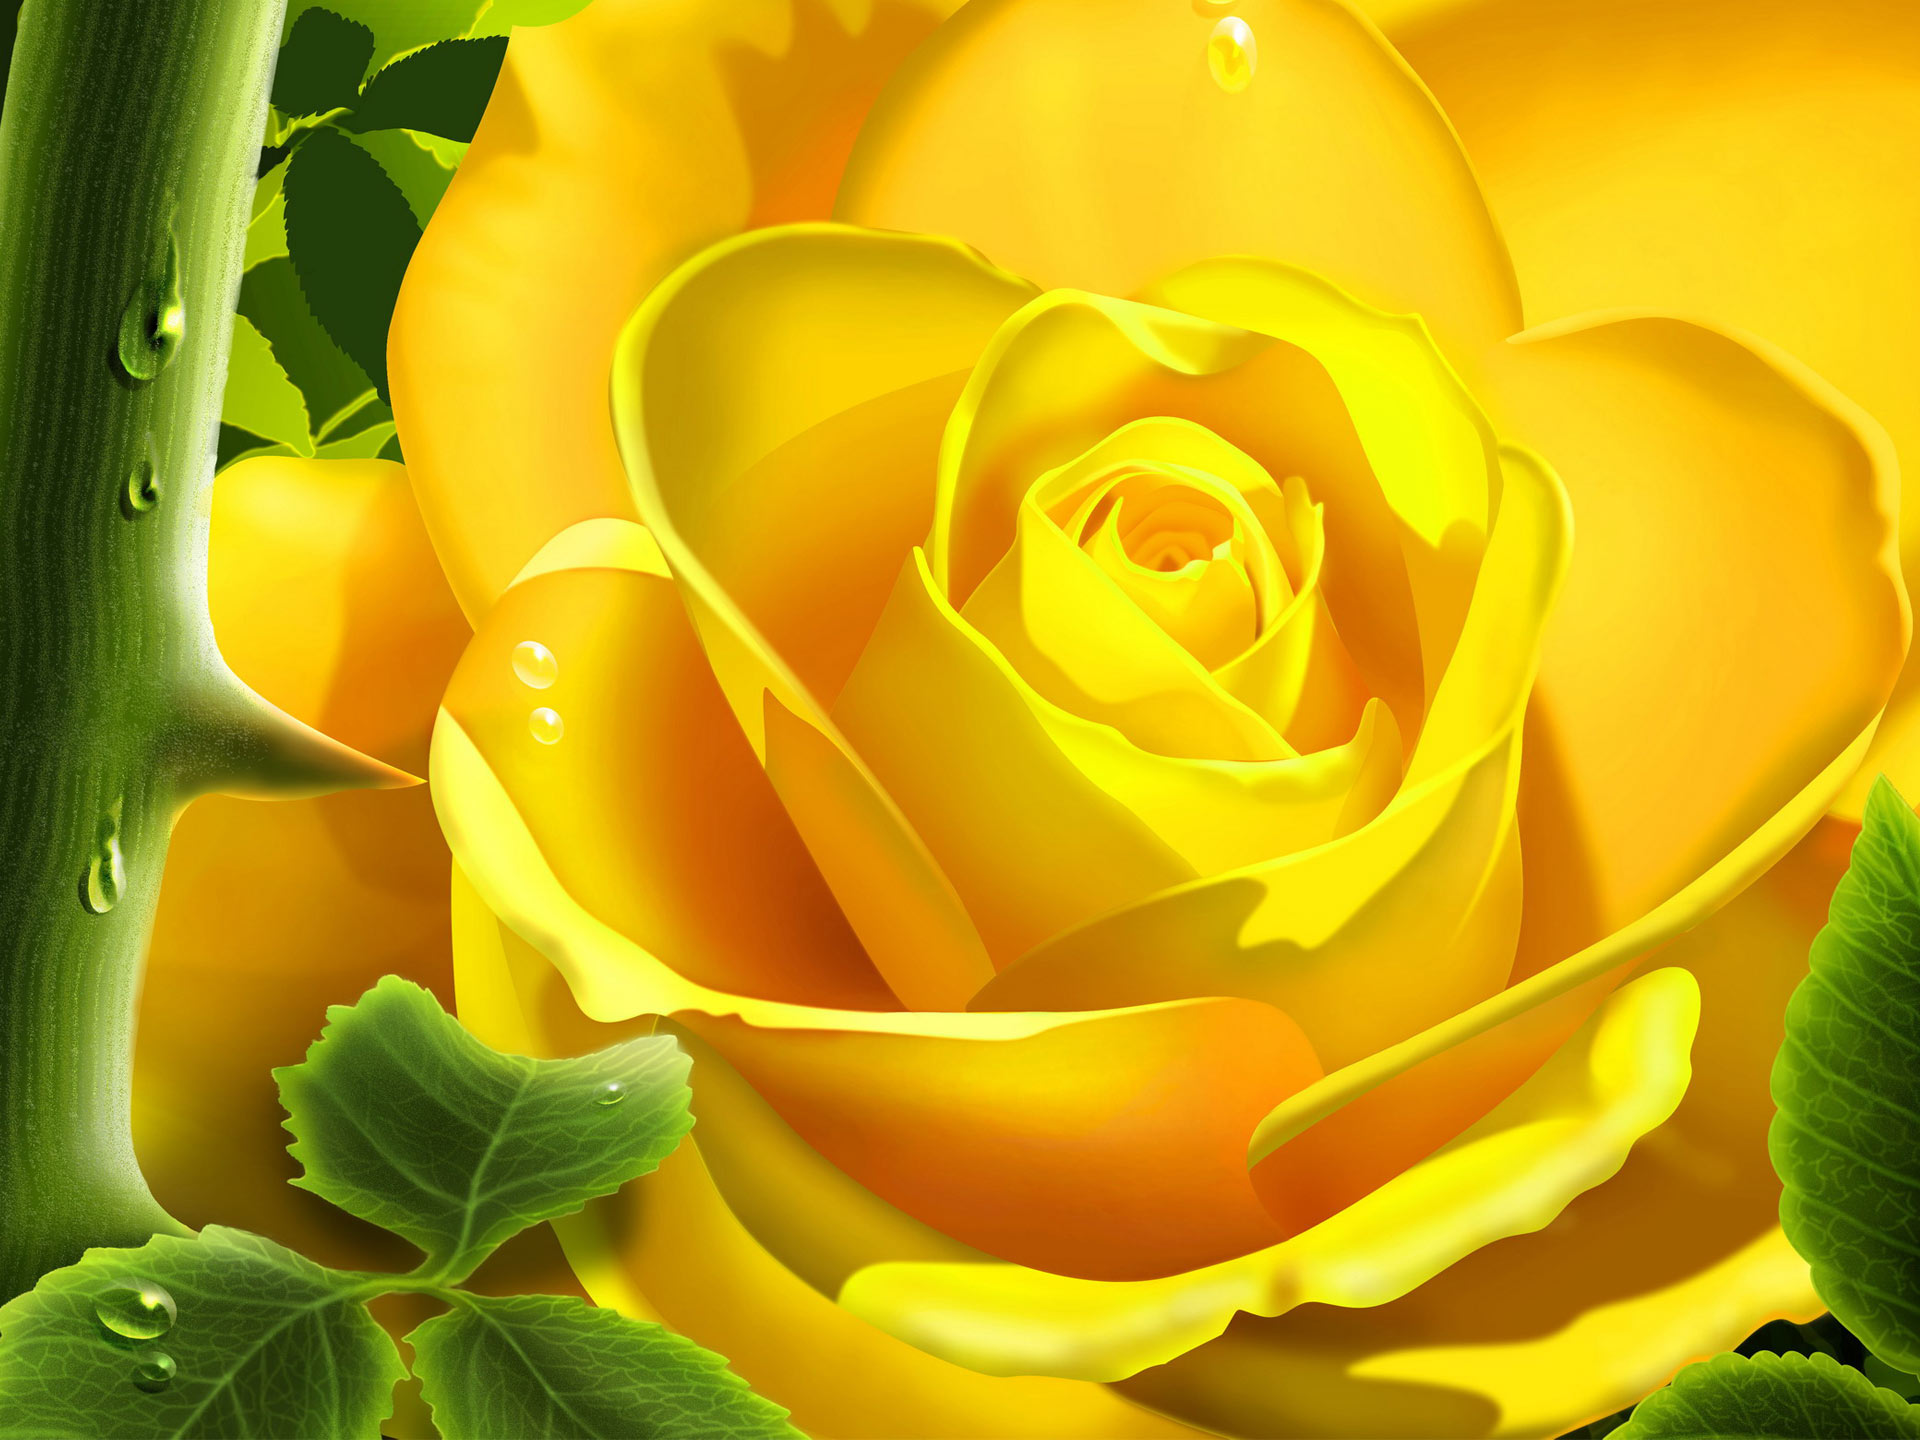 Single Yellow Rose Flowers Nature Background Wallpaper On